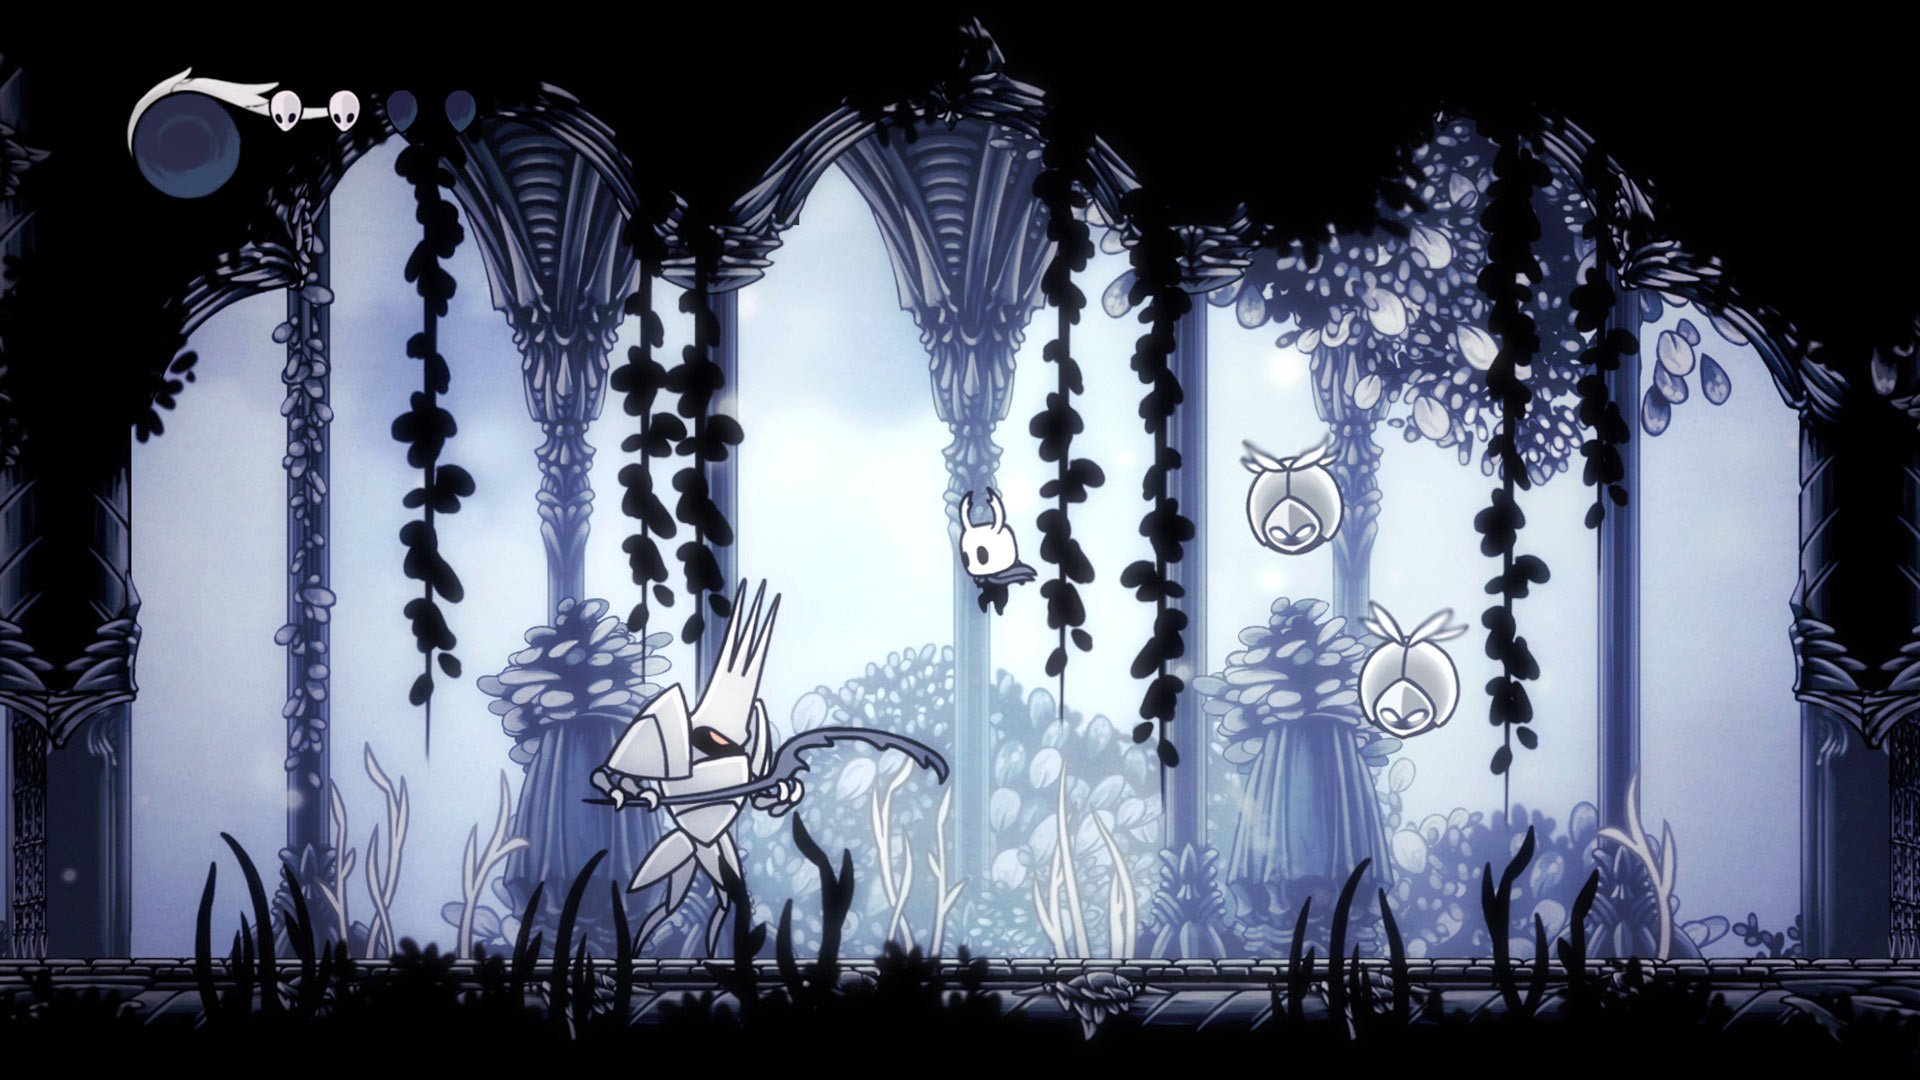 hollow knight ps4